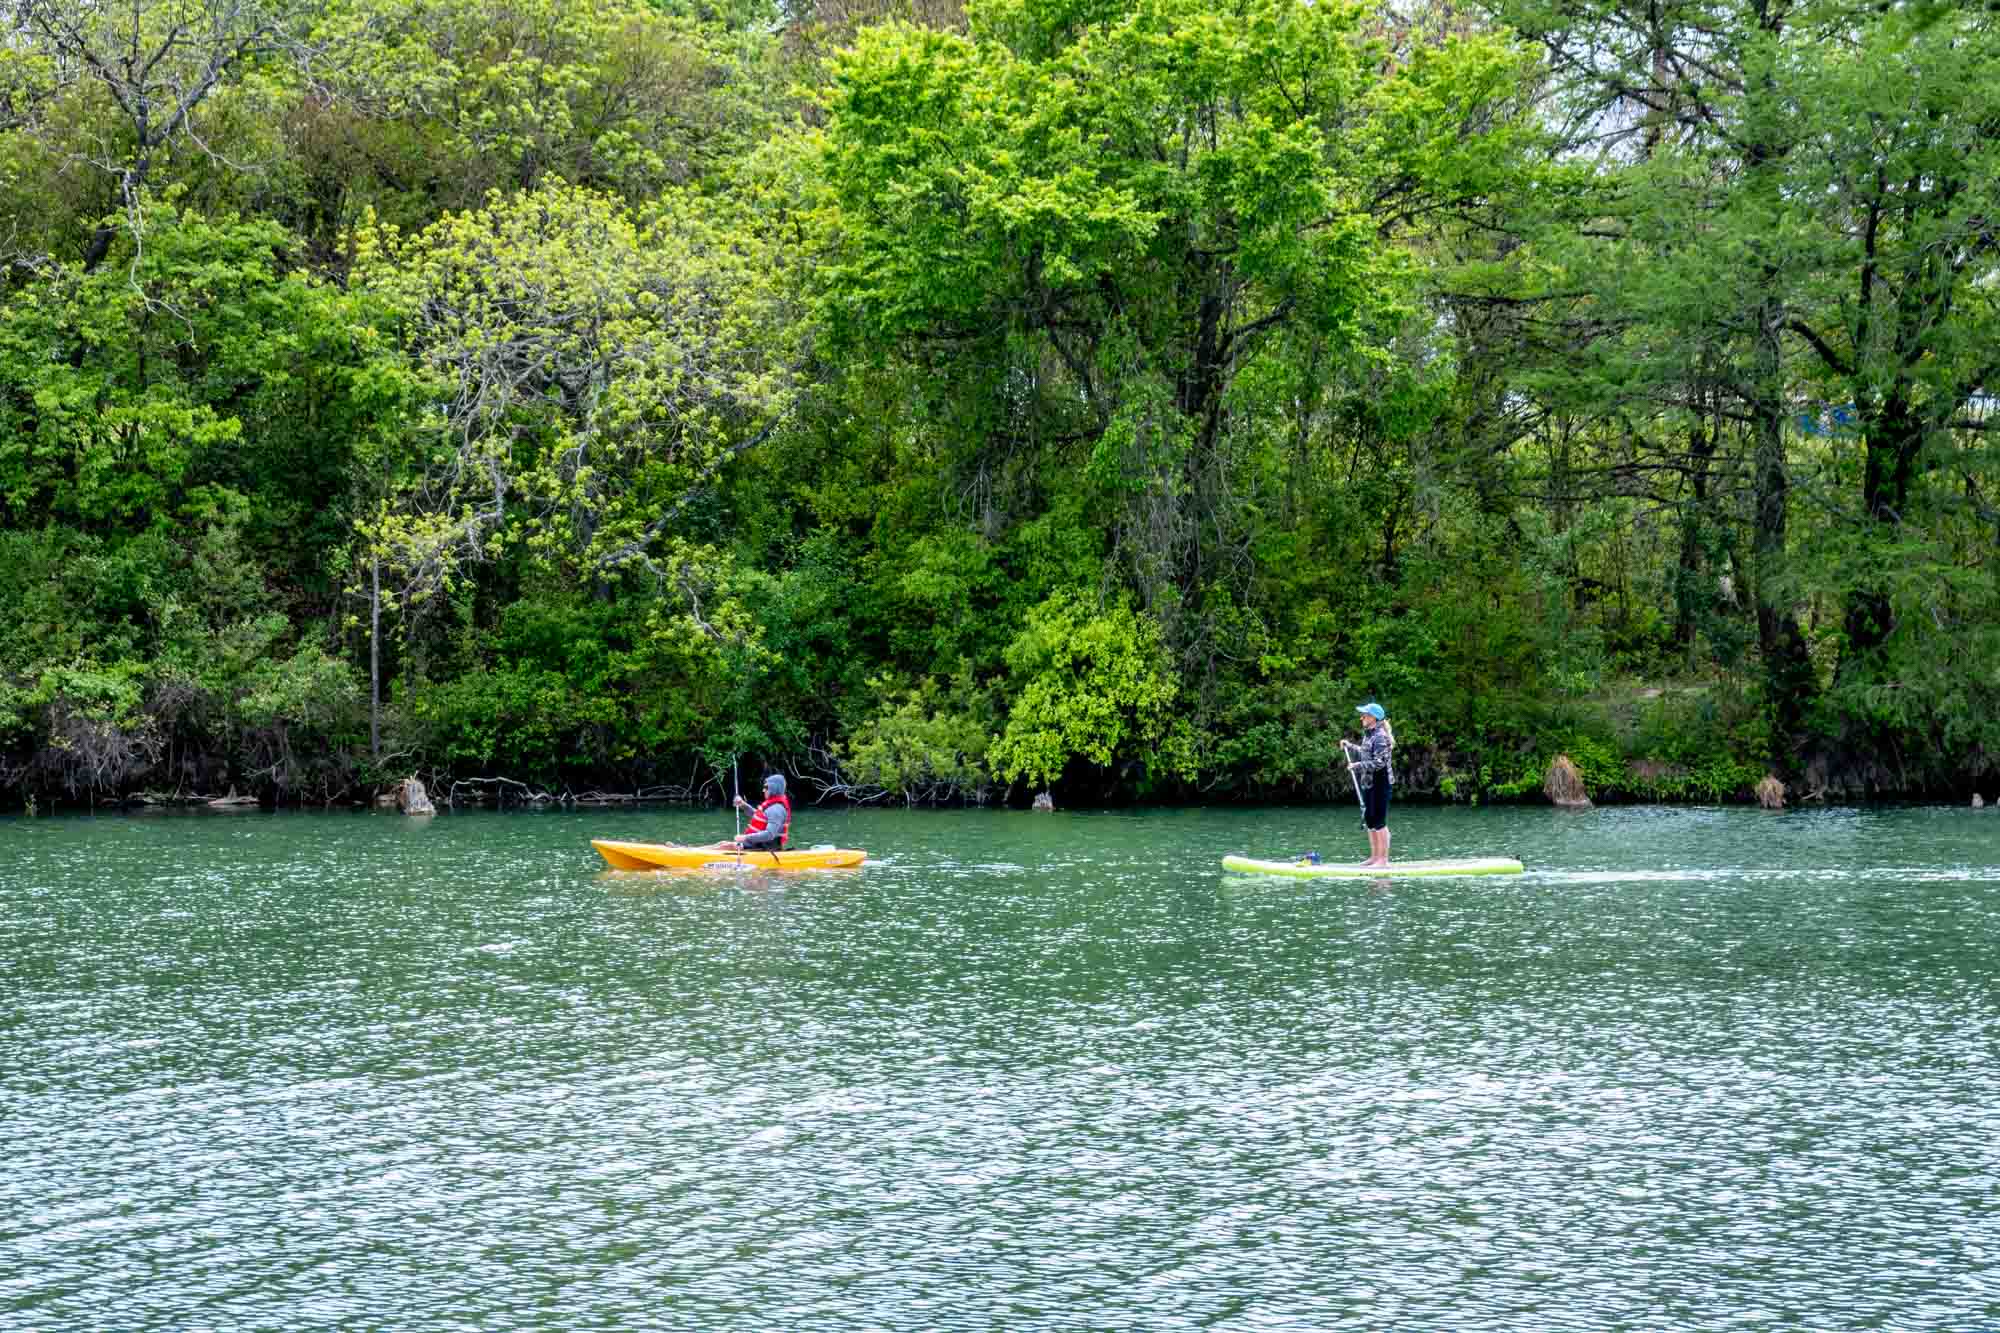 Kayaker and sand-up paddle boarders in a river lined by trees